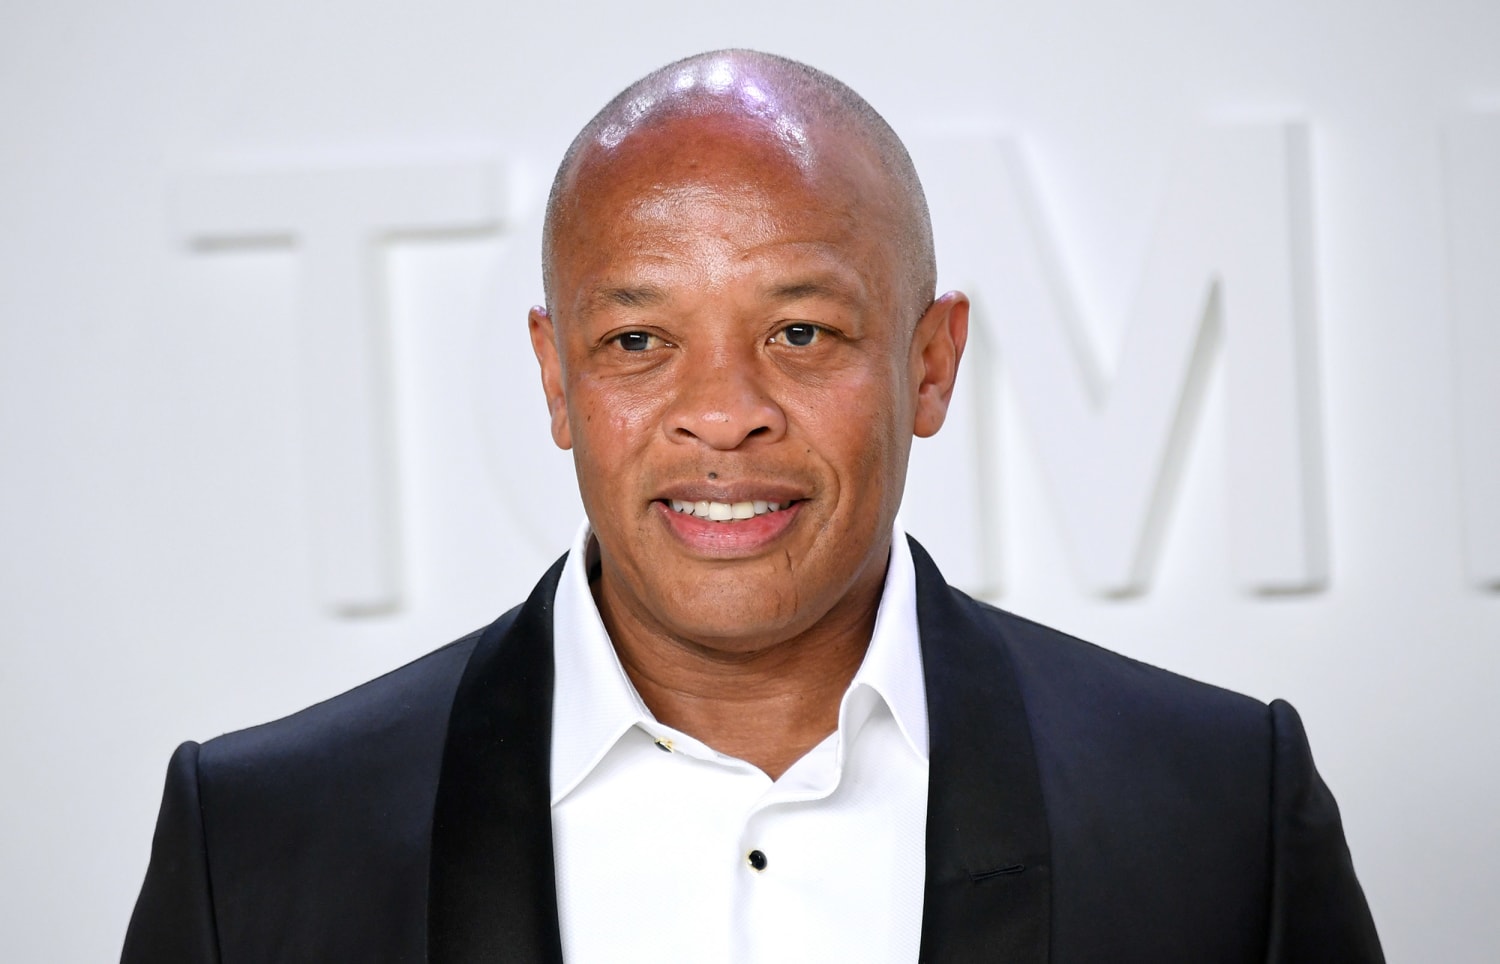 Dr. Dre's house targeted in burglary attempt a day after he was admitted to  hospital, police say